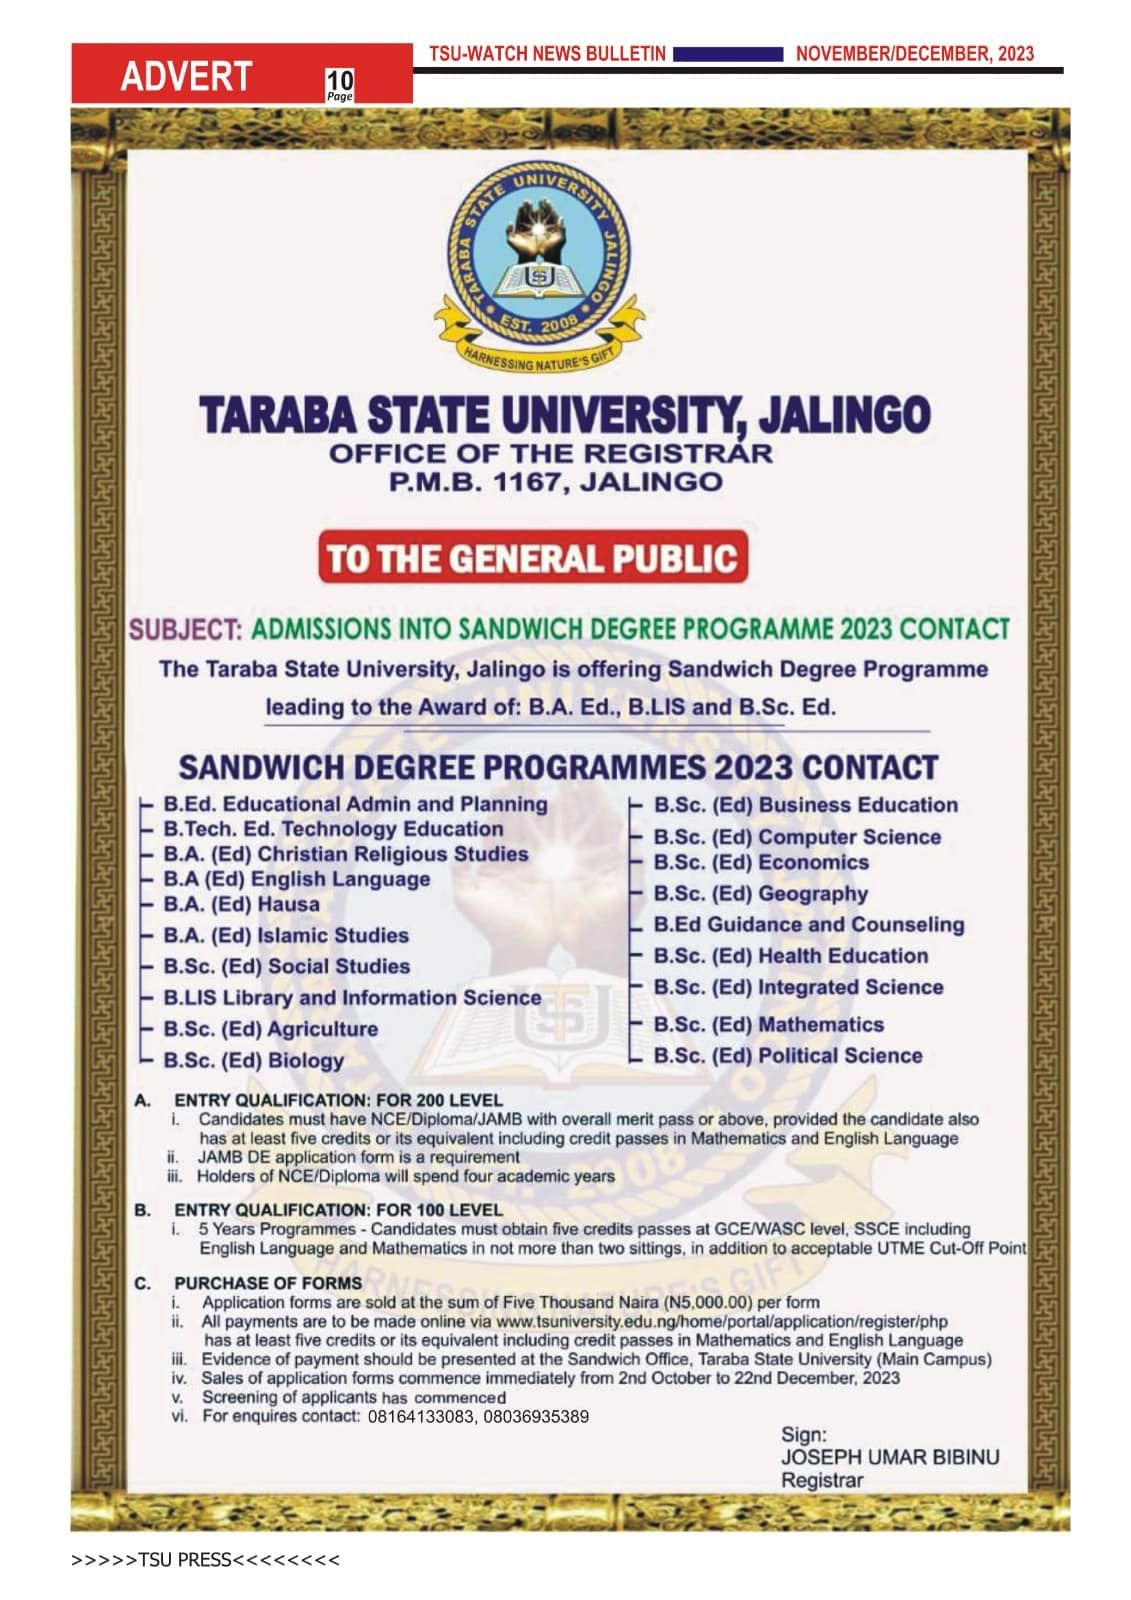 ADMISSIONS INTO SANDWICH DEGREE PROGRAMME 2023 CONTACT